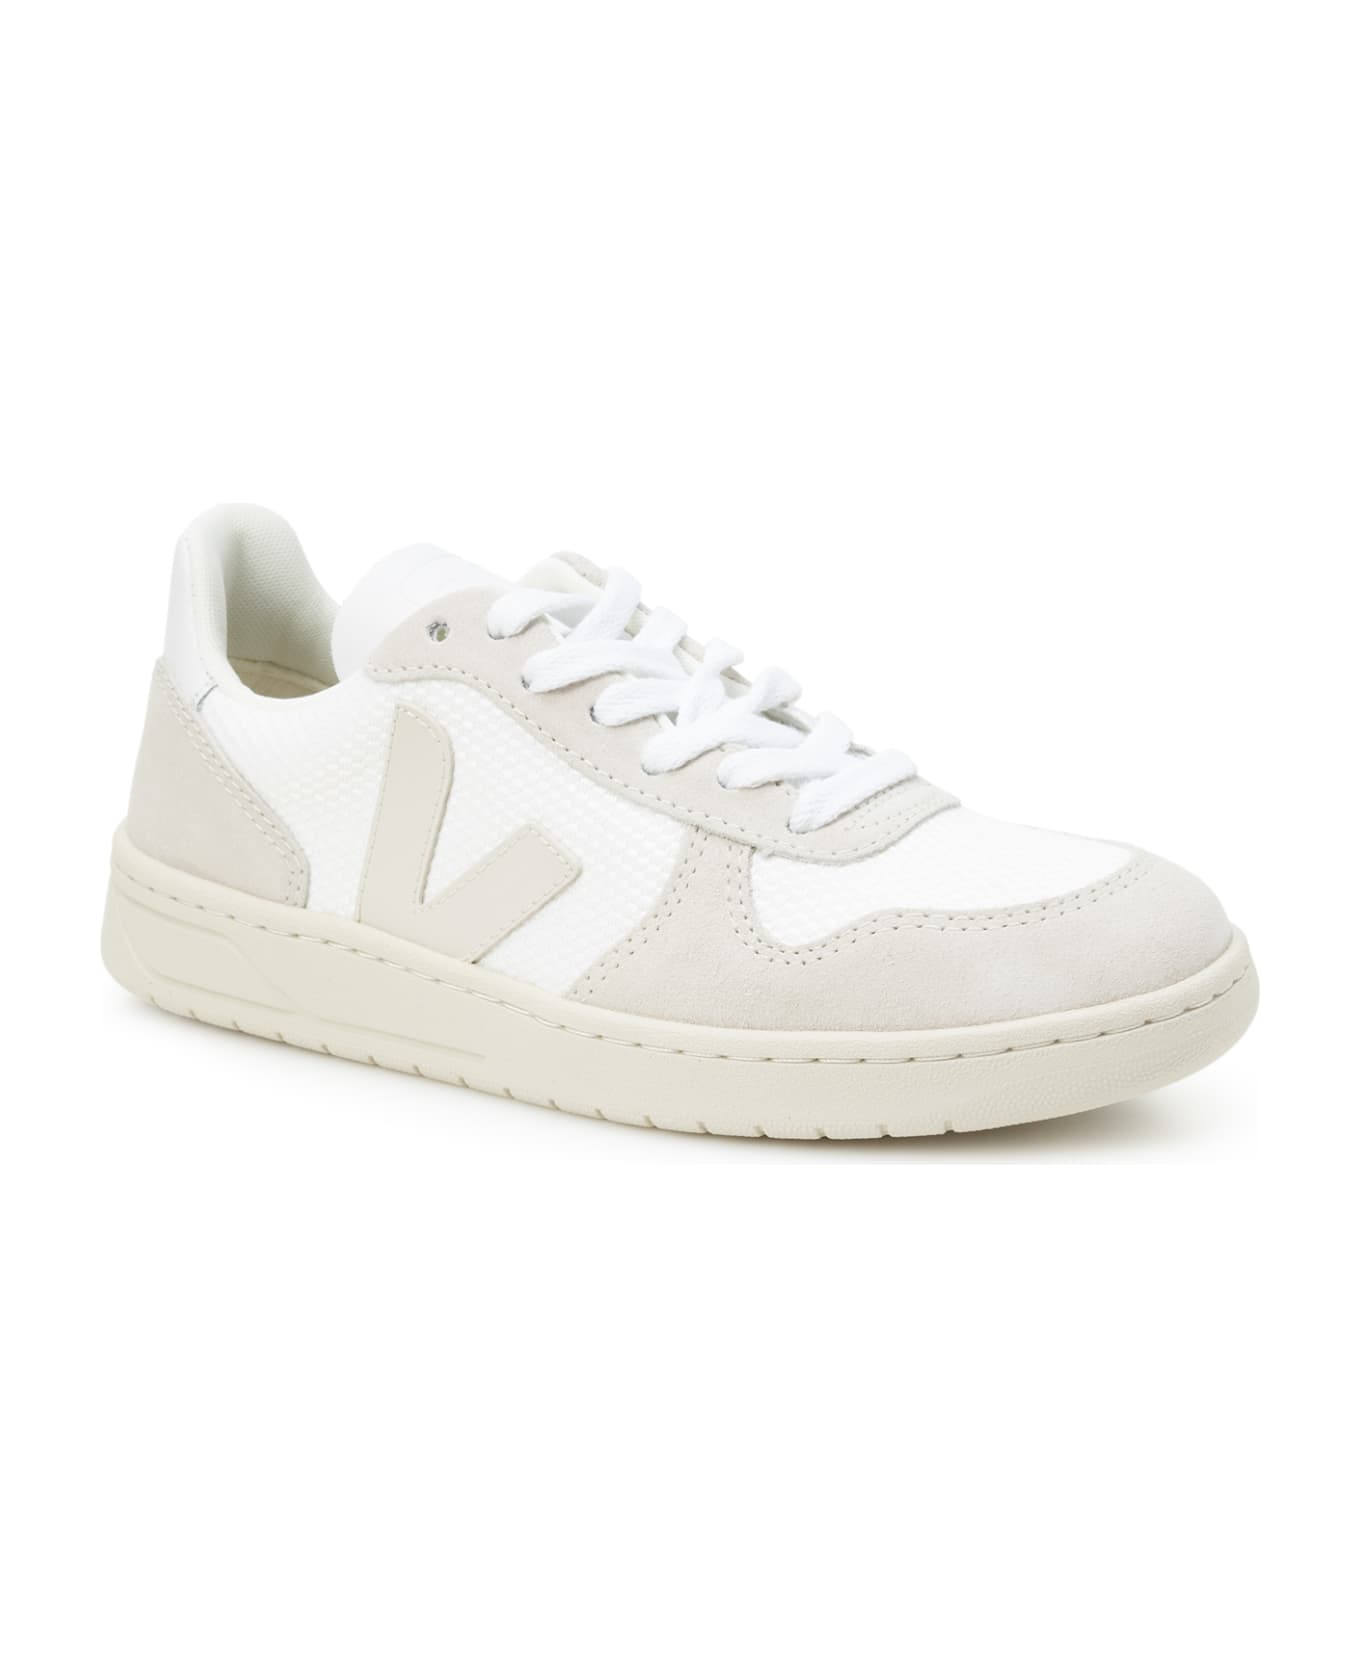 Veja Sneakers - White/natural pierre